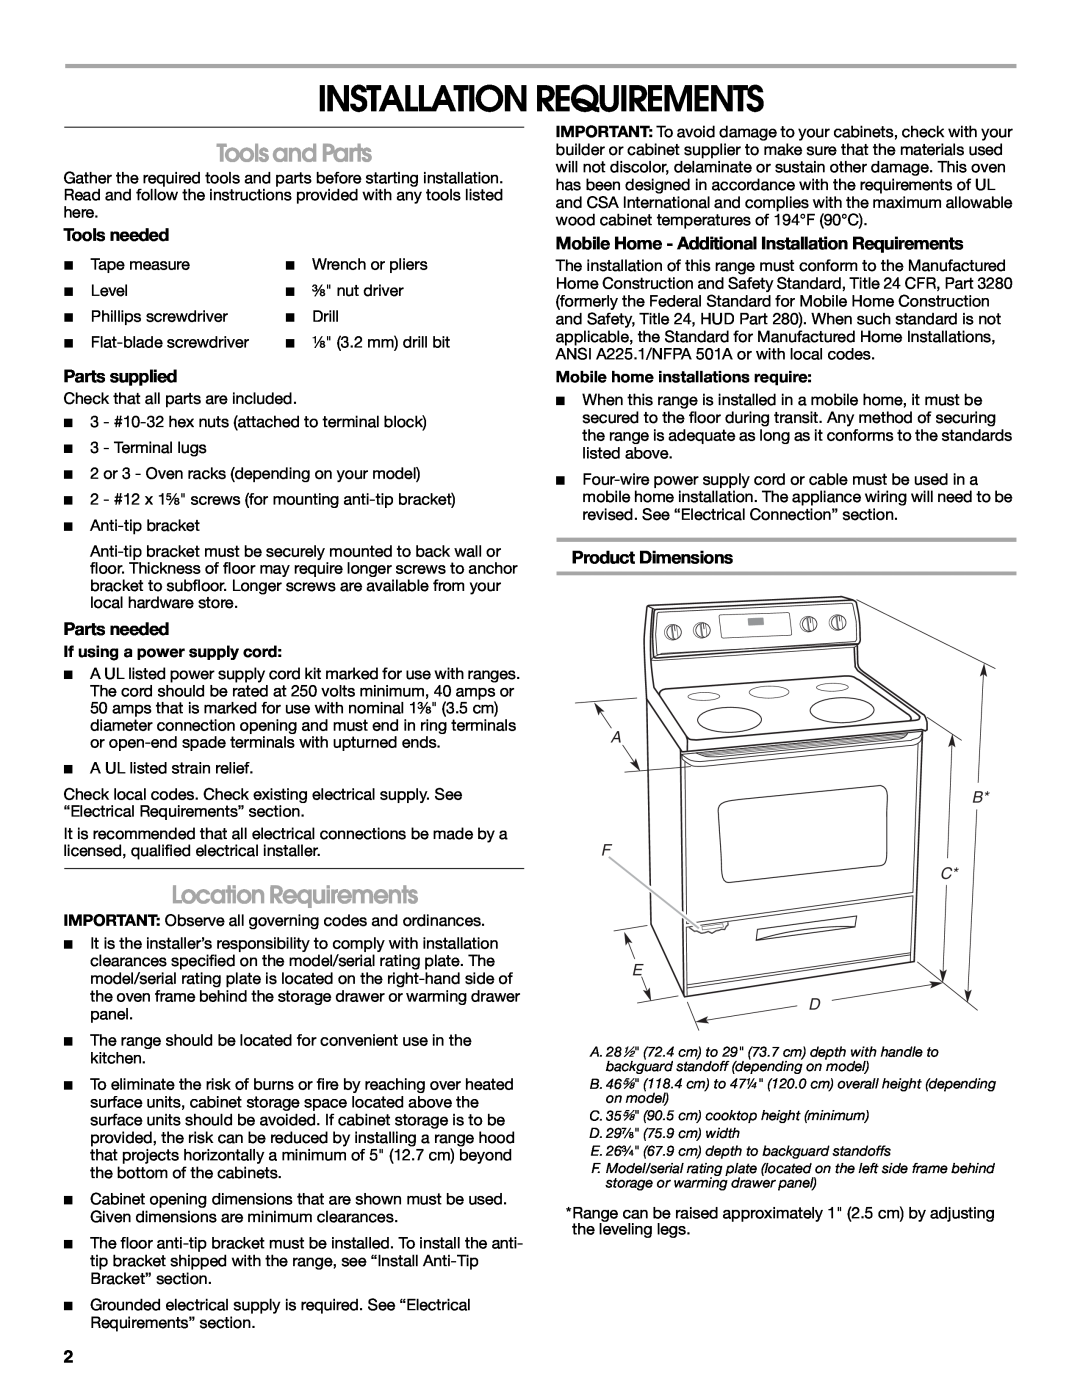 Whirlpool W10258095A Installation Requirements, Tools and Parts, Location Requirements, Tools needed, Parts supplied 